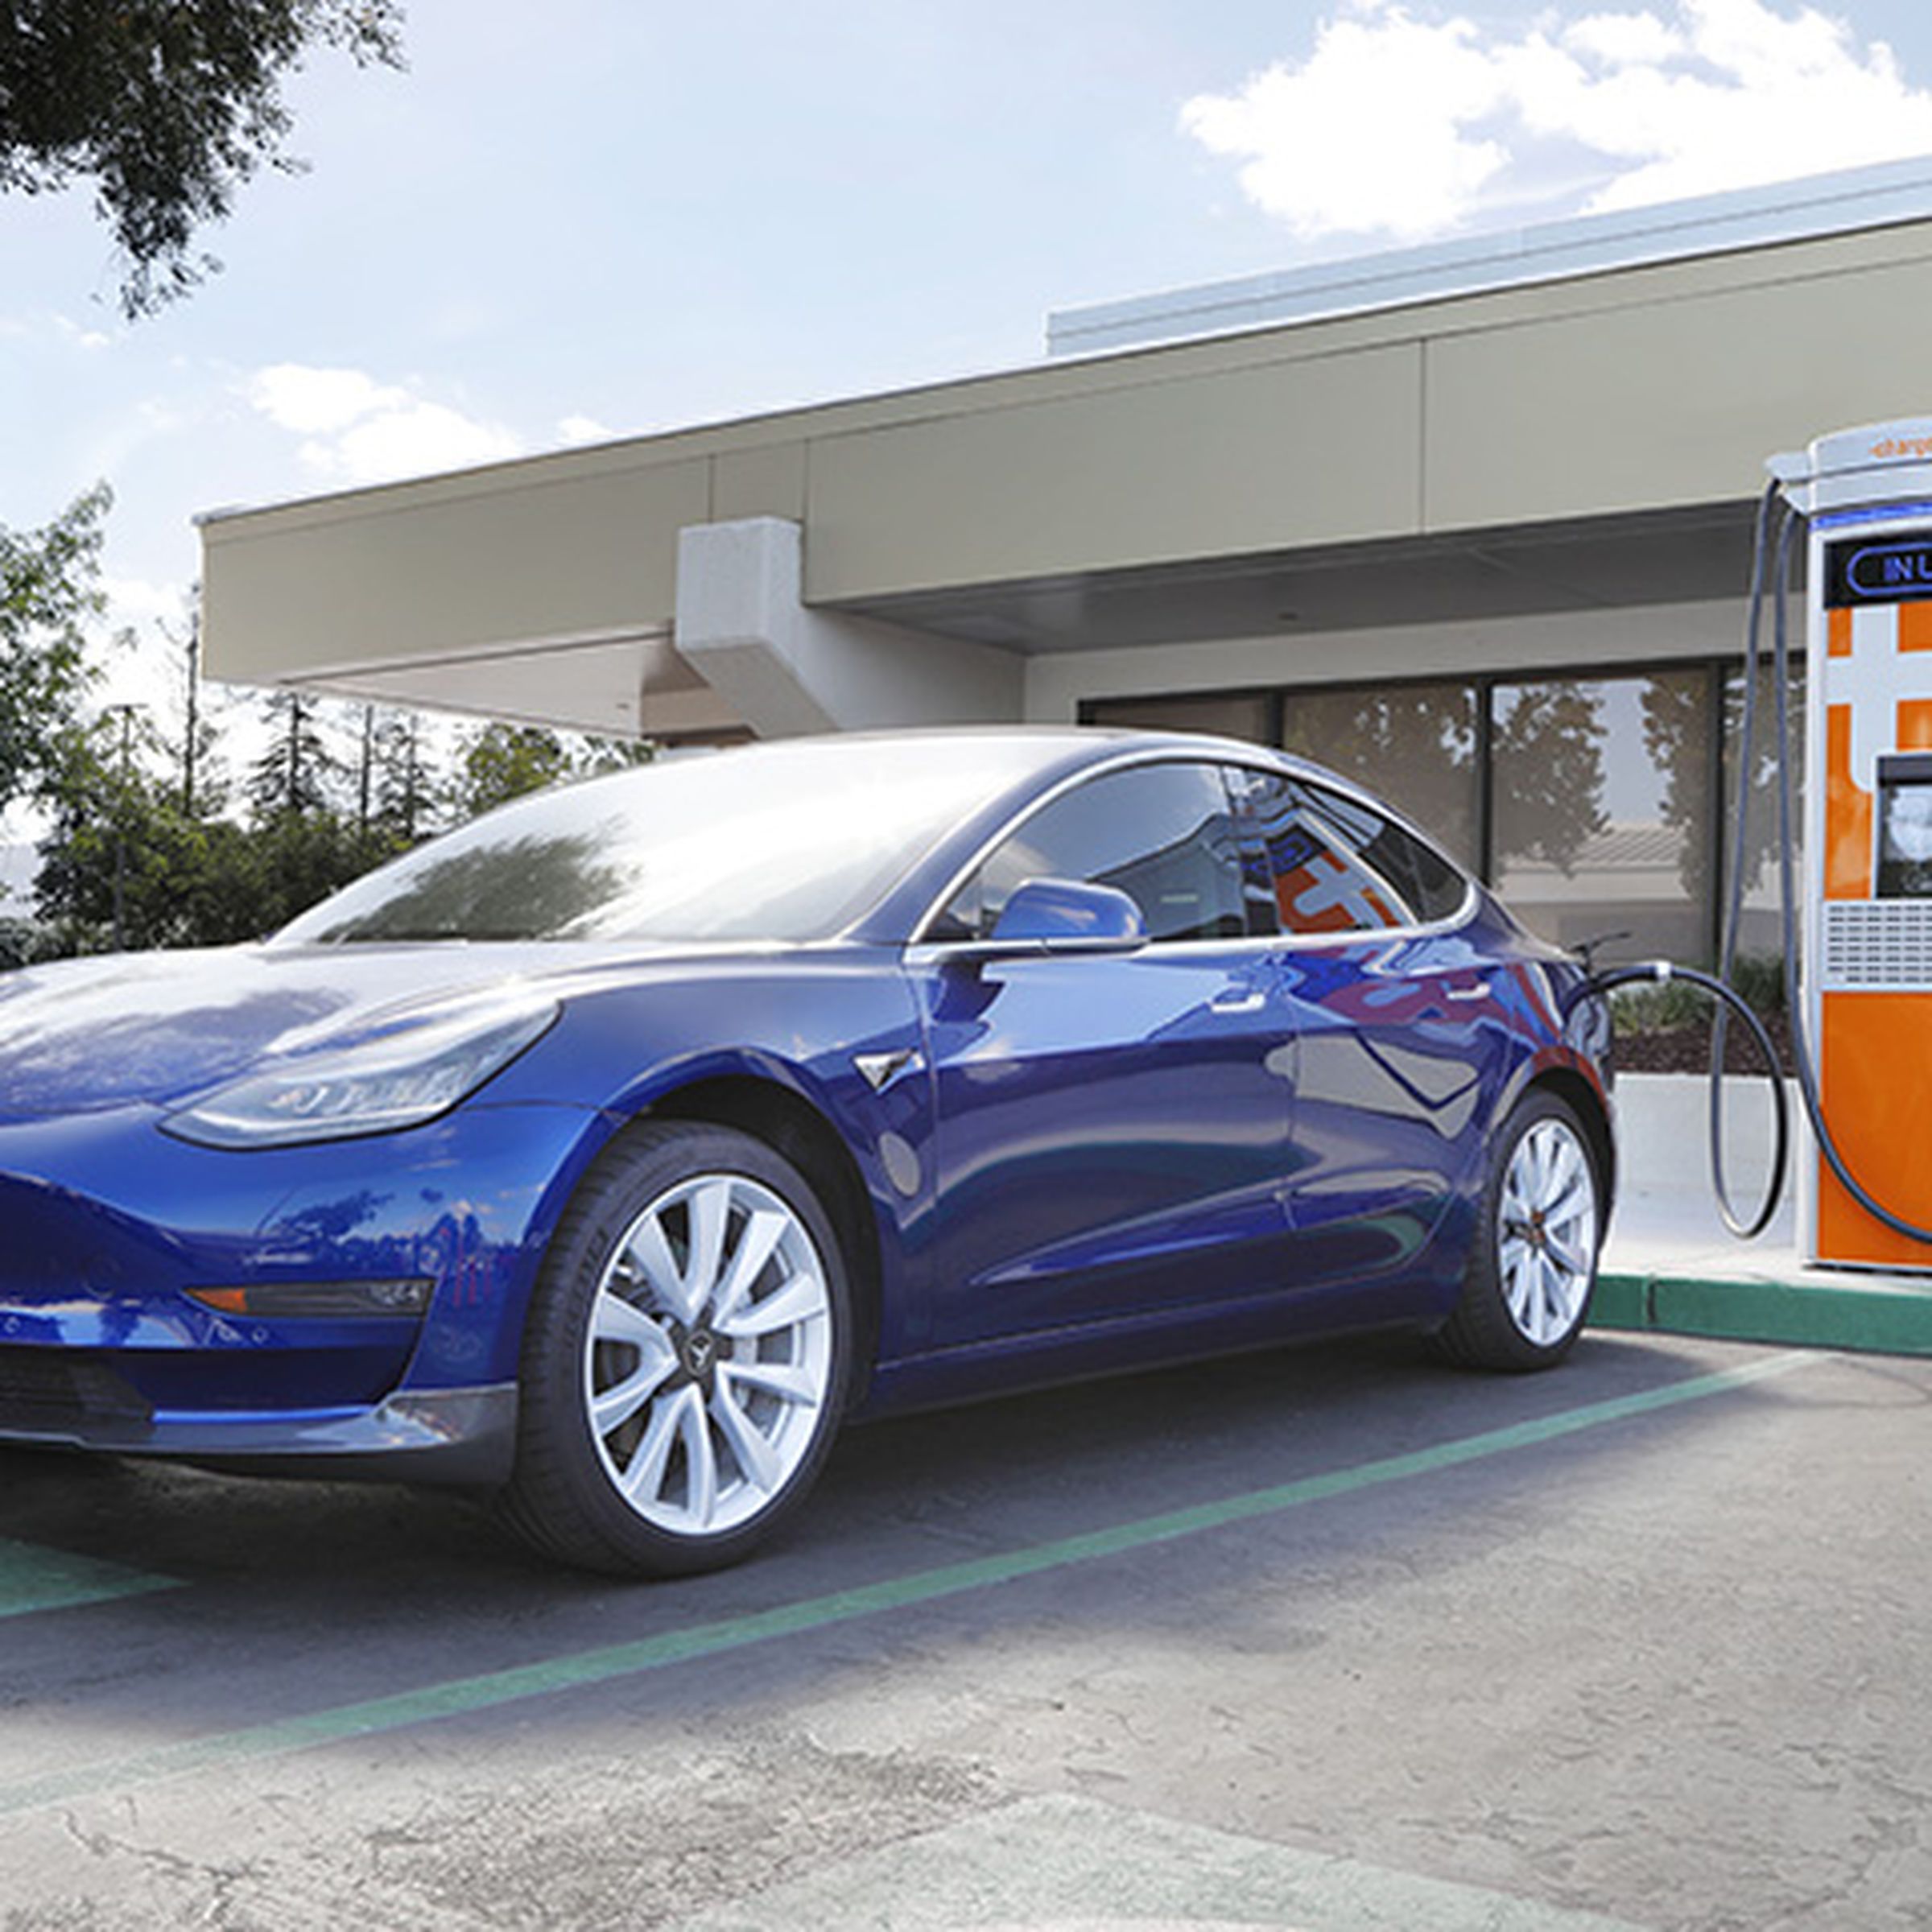 A photo of a Tesla parked in front of an orange charger.